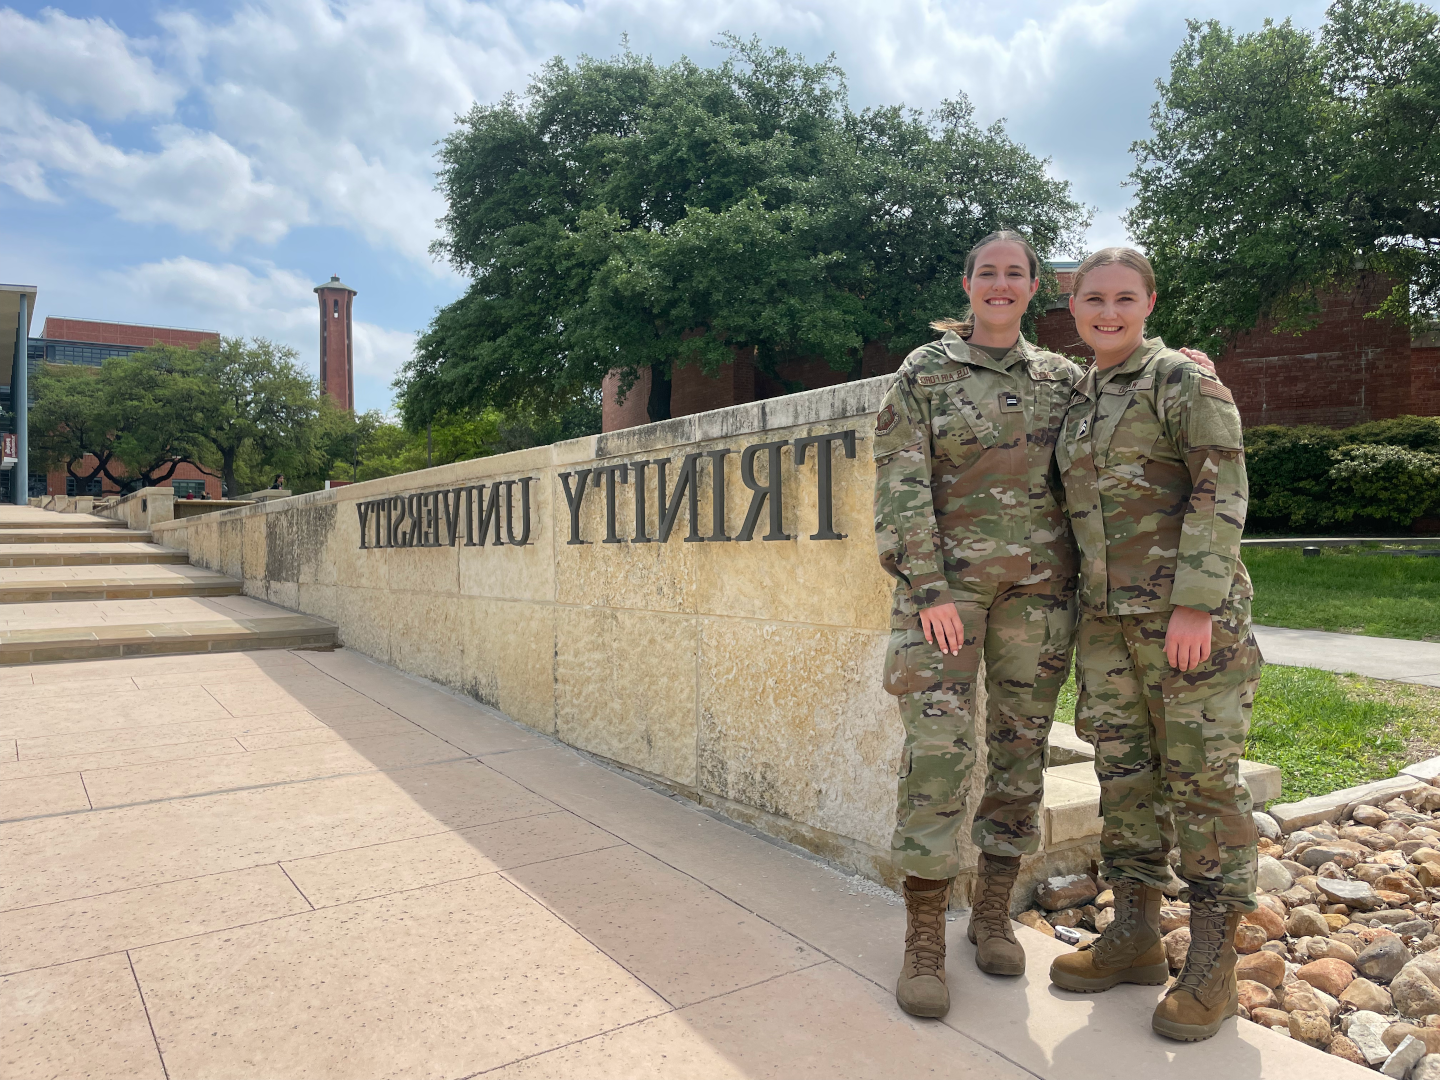 Two Trinity students in Army camouflage uniforms standing in front of Trinity University sign. 